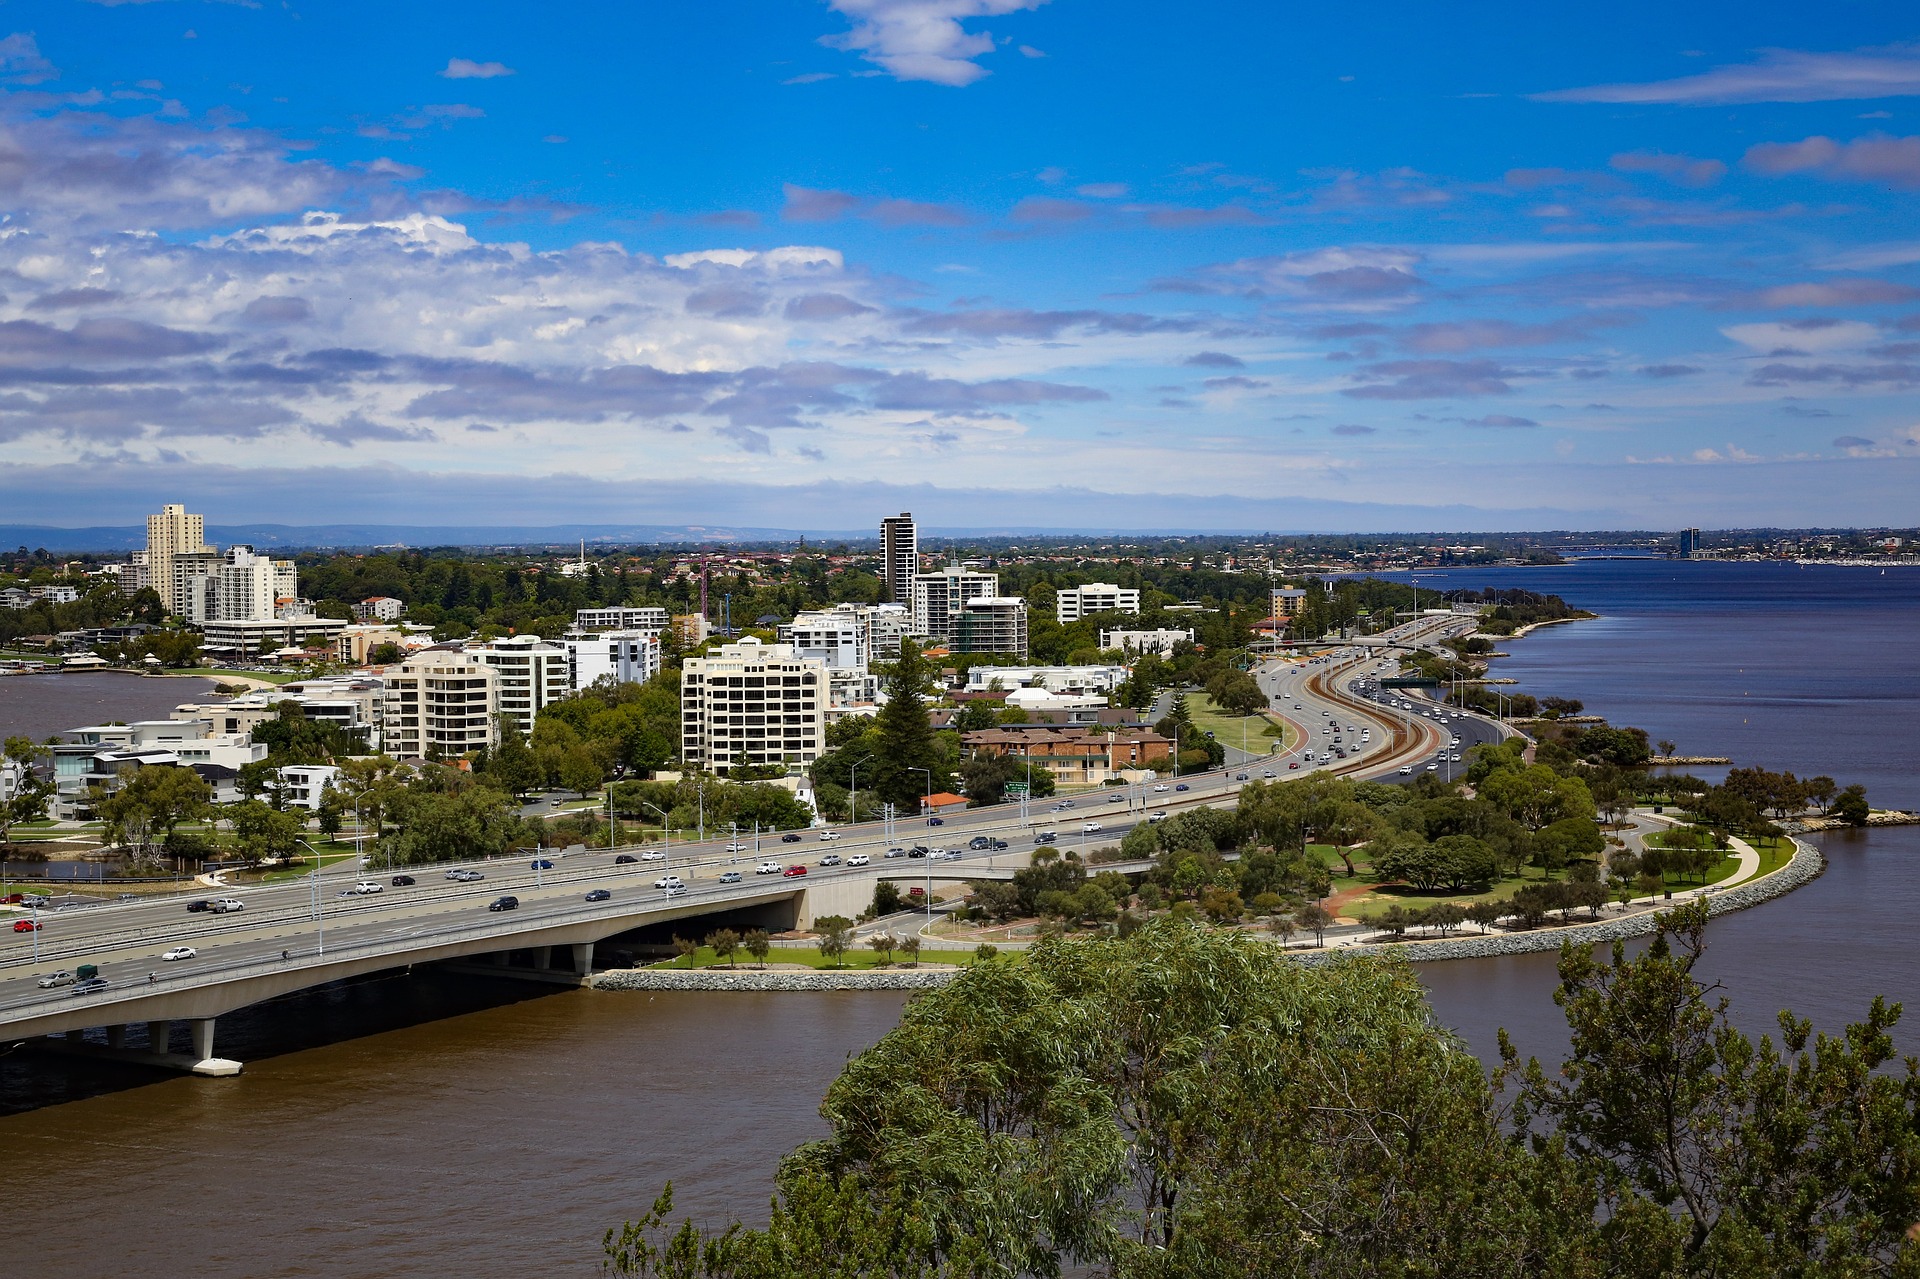 Project Identifying Best Pavement Practices perth 2082263 1920 Identifying Best Pavement Practice for Major Projects 49